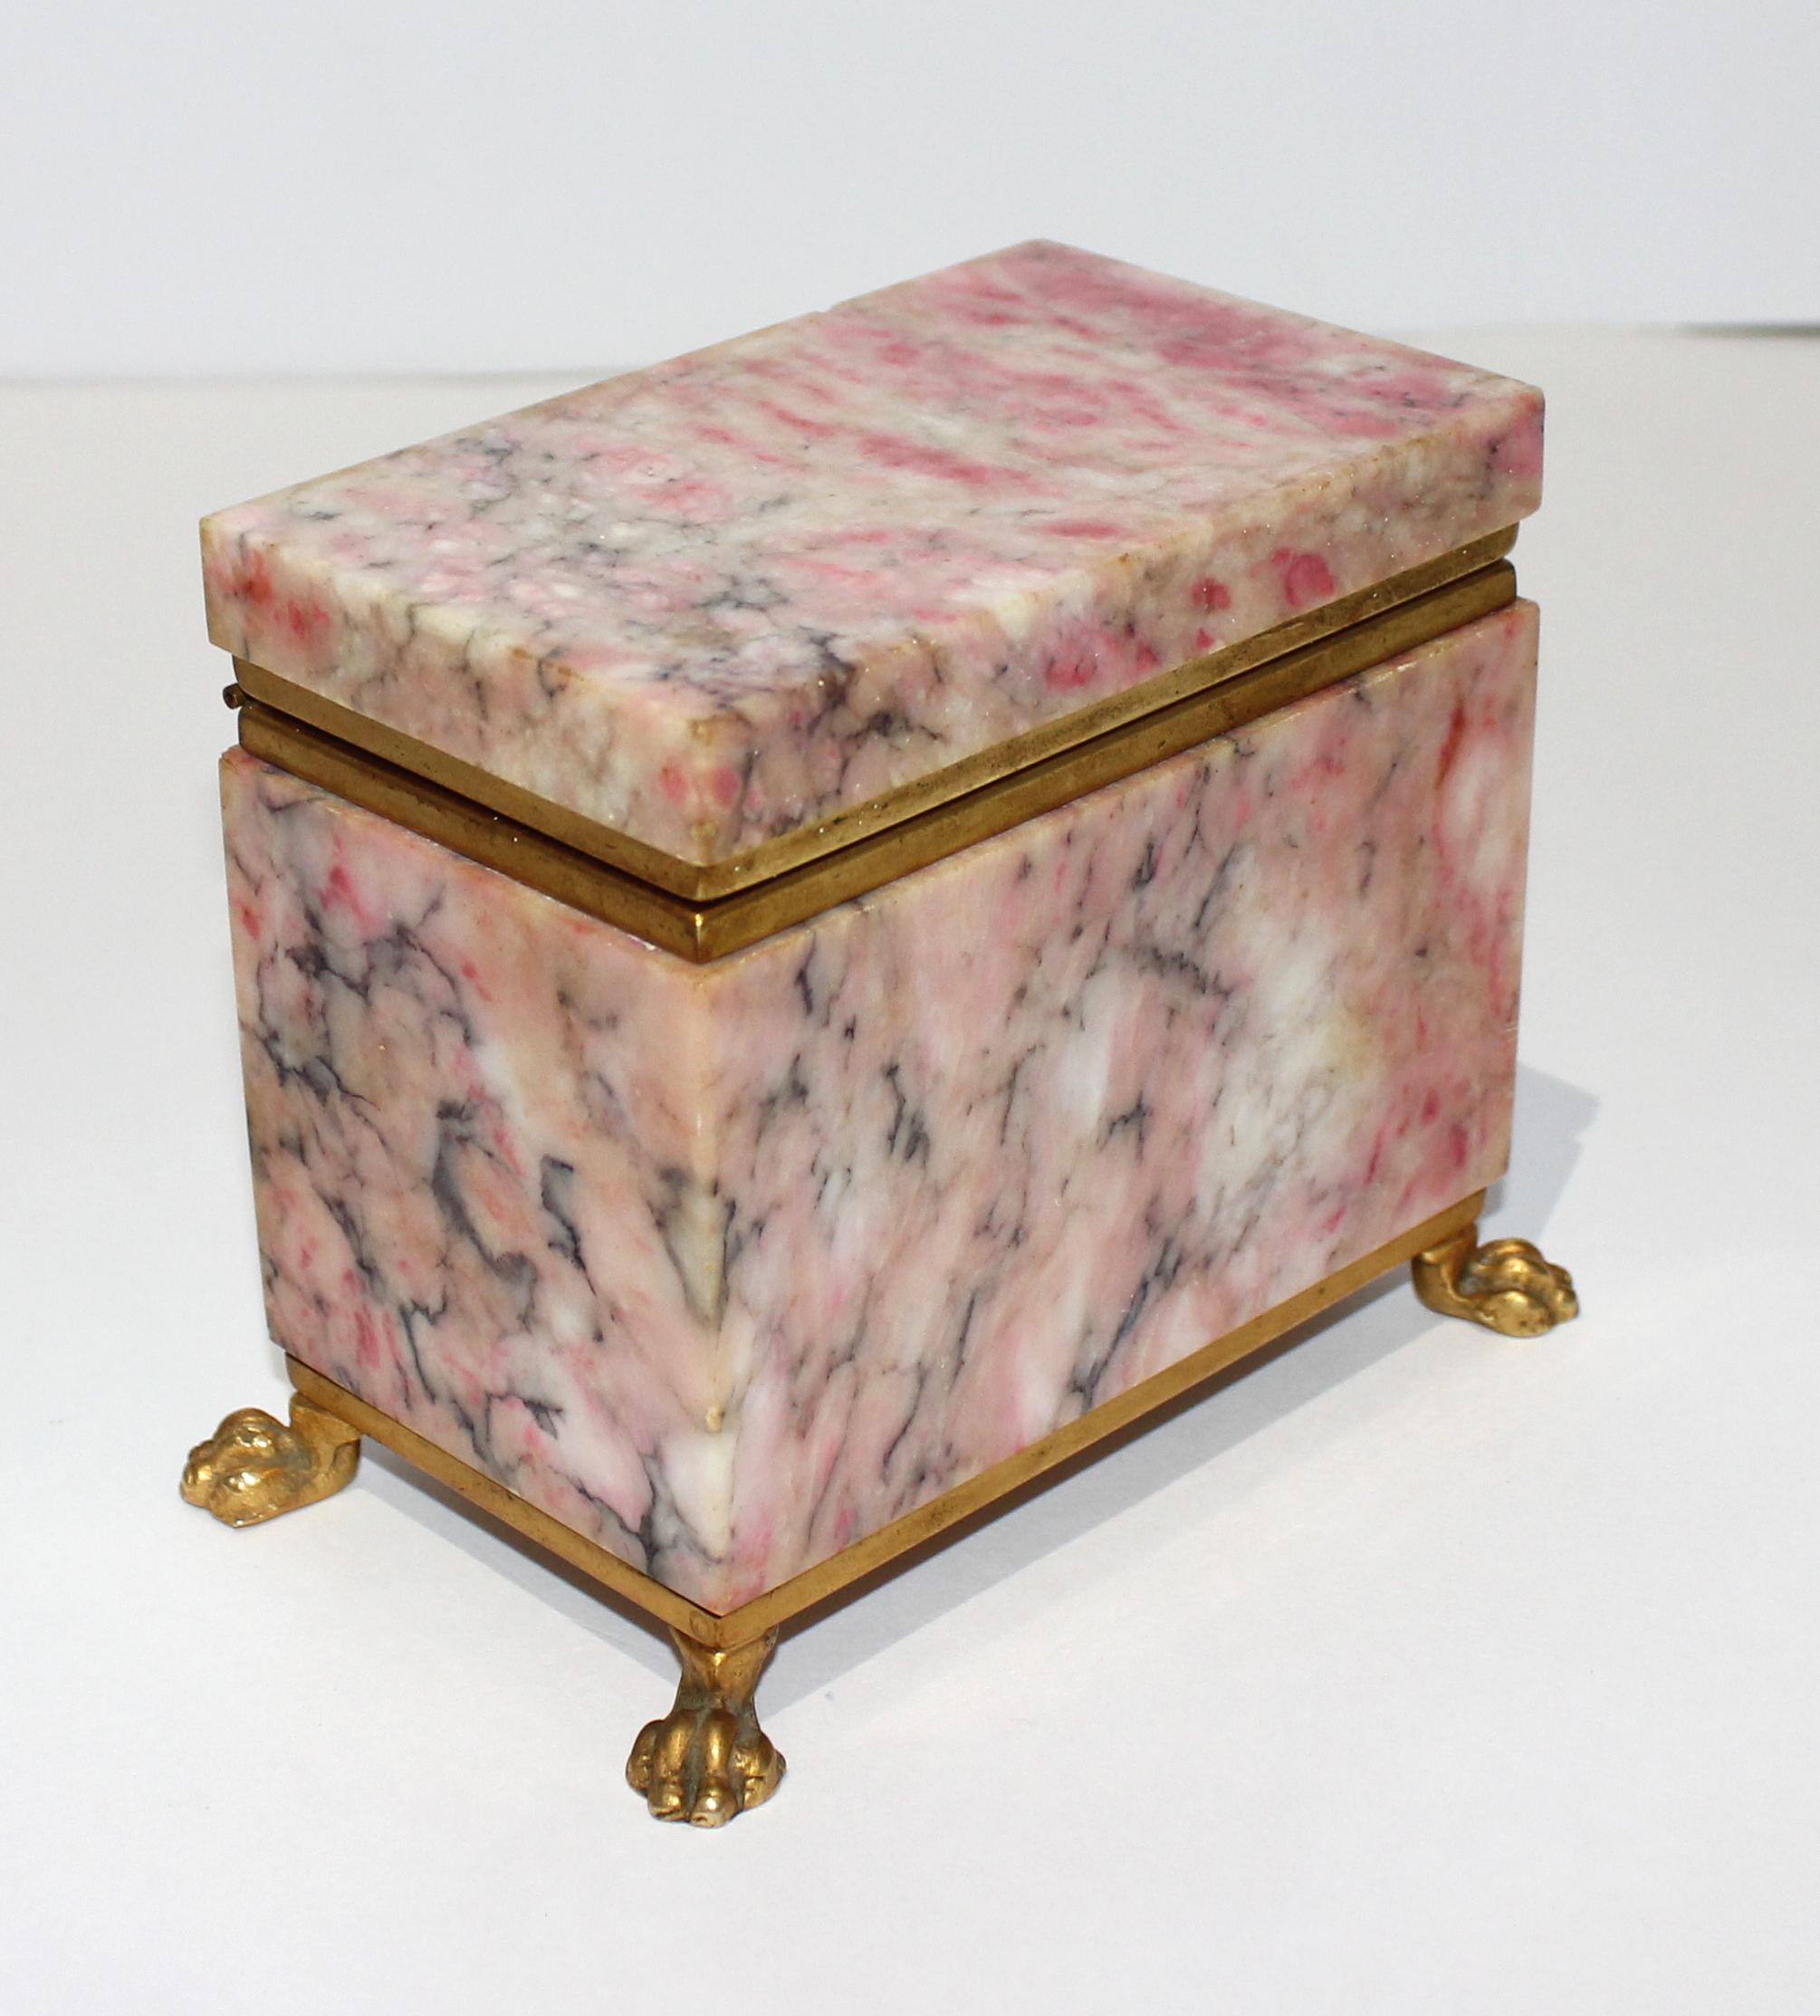 Early 20th Century Antique Jewelry Casket with Gold Dore Accent